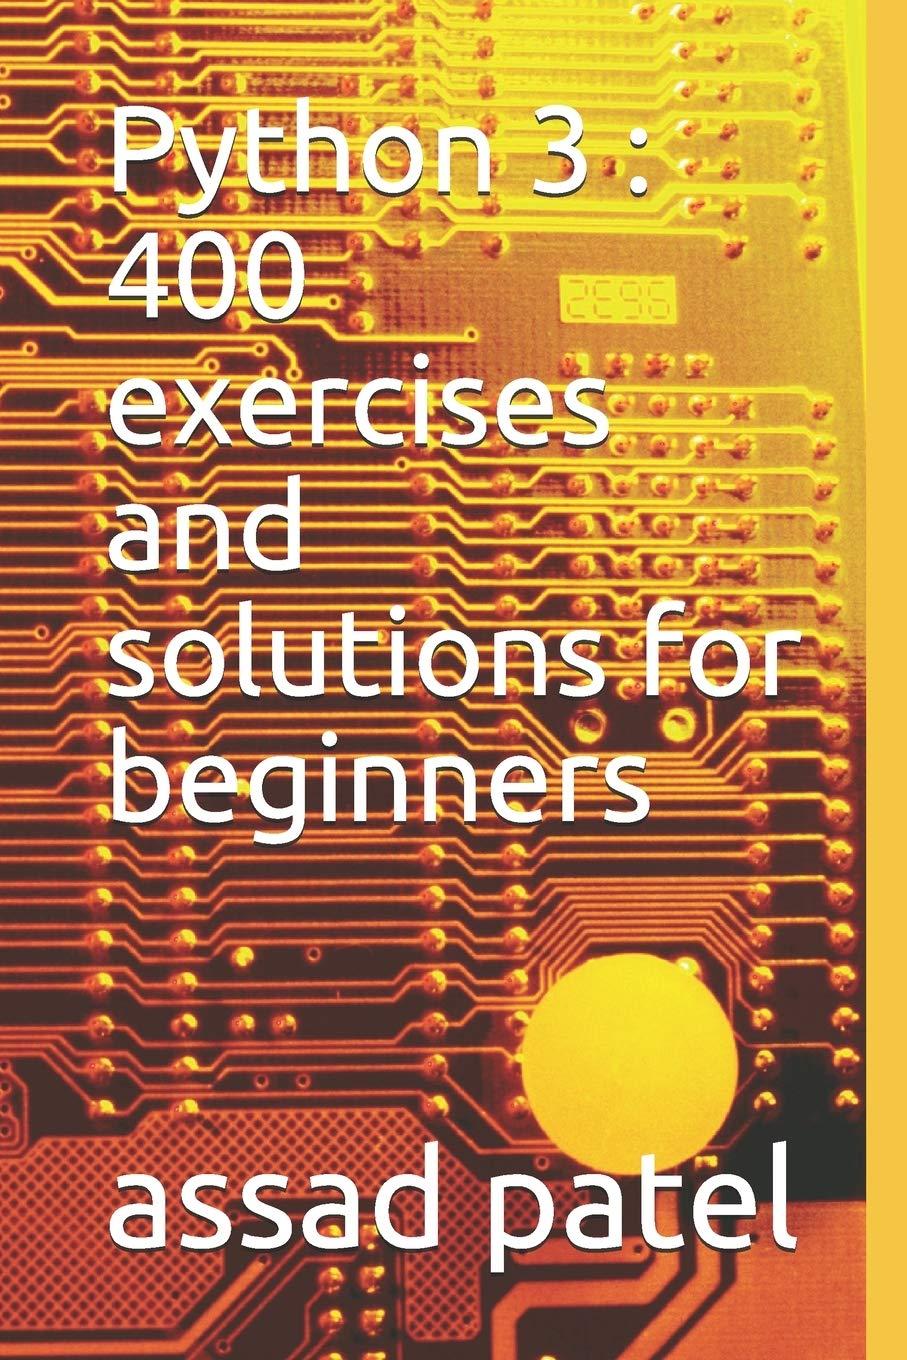 python 3  400 exercises and solutions for beginners 1st edition assad patel b084dgx15z, 979-8606811946